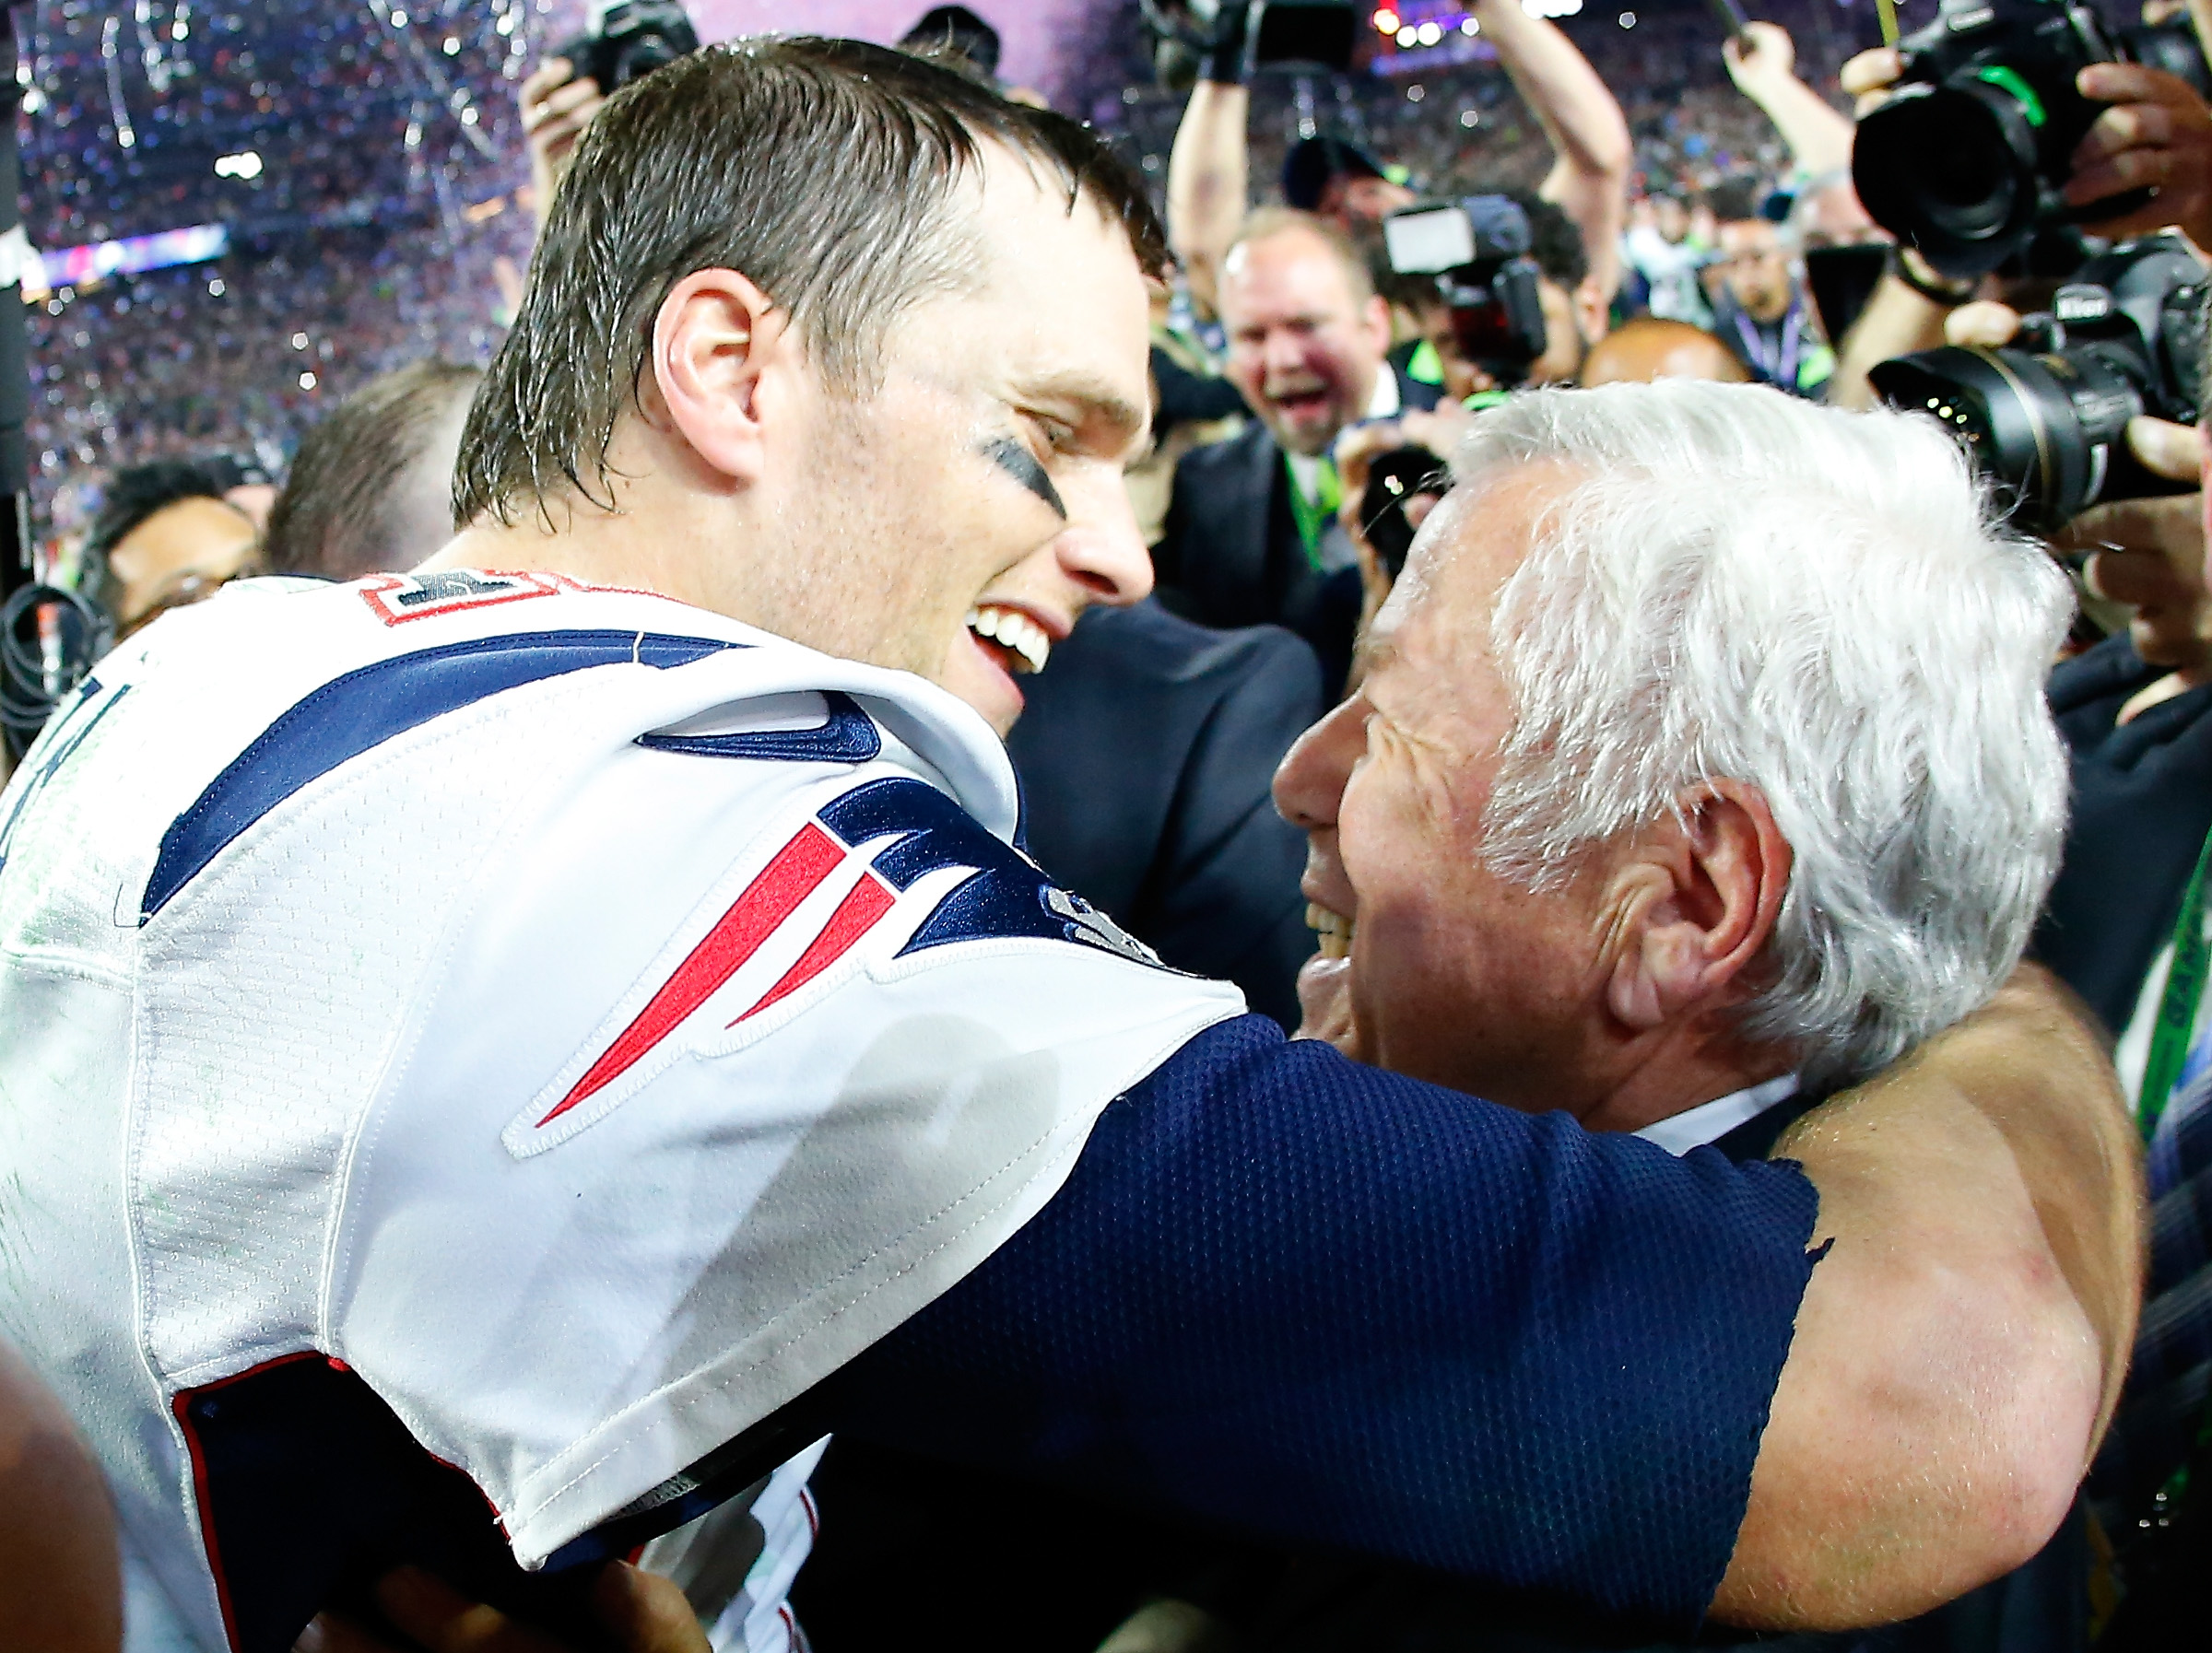 Tom Brady embraces New England Patriots owner Robert Kraft after defeating the Seattle Seahawks in Super Bowl XLIX in 2015.